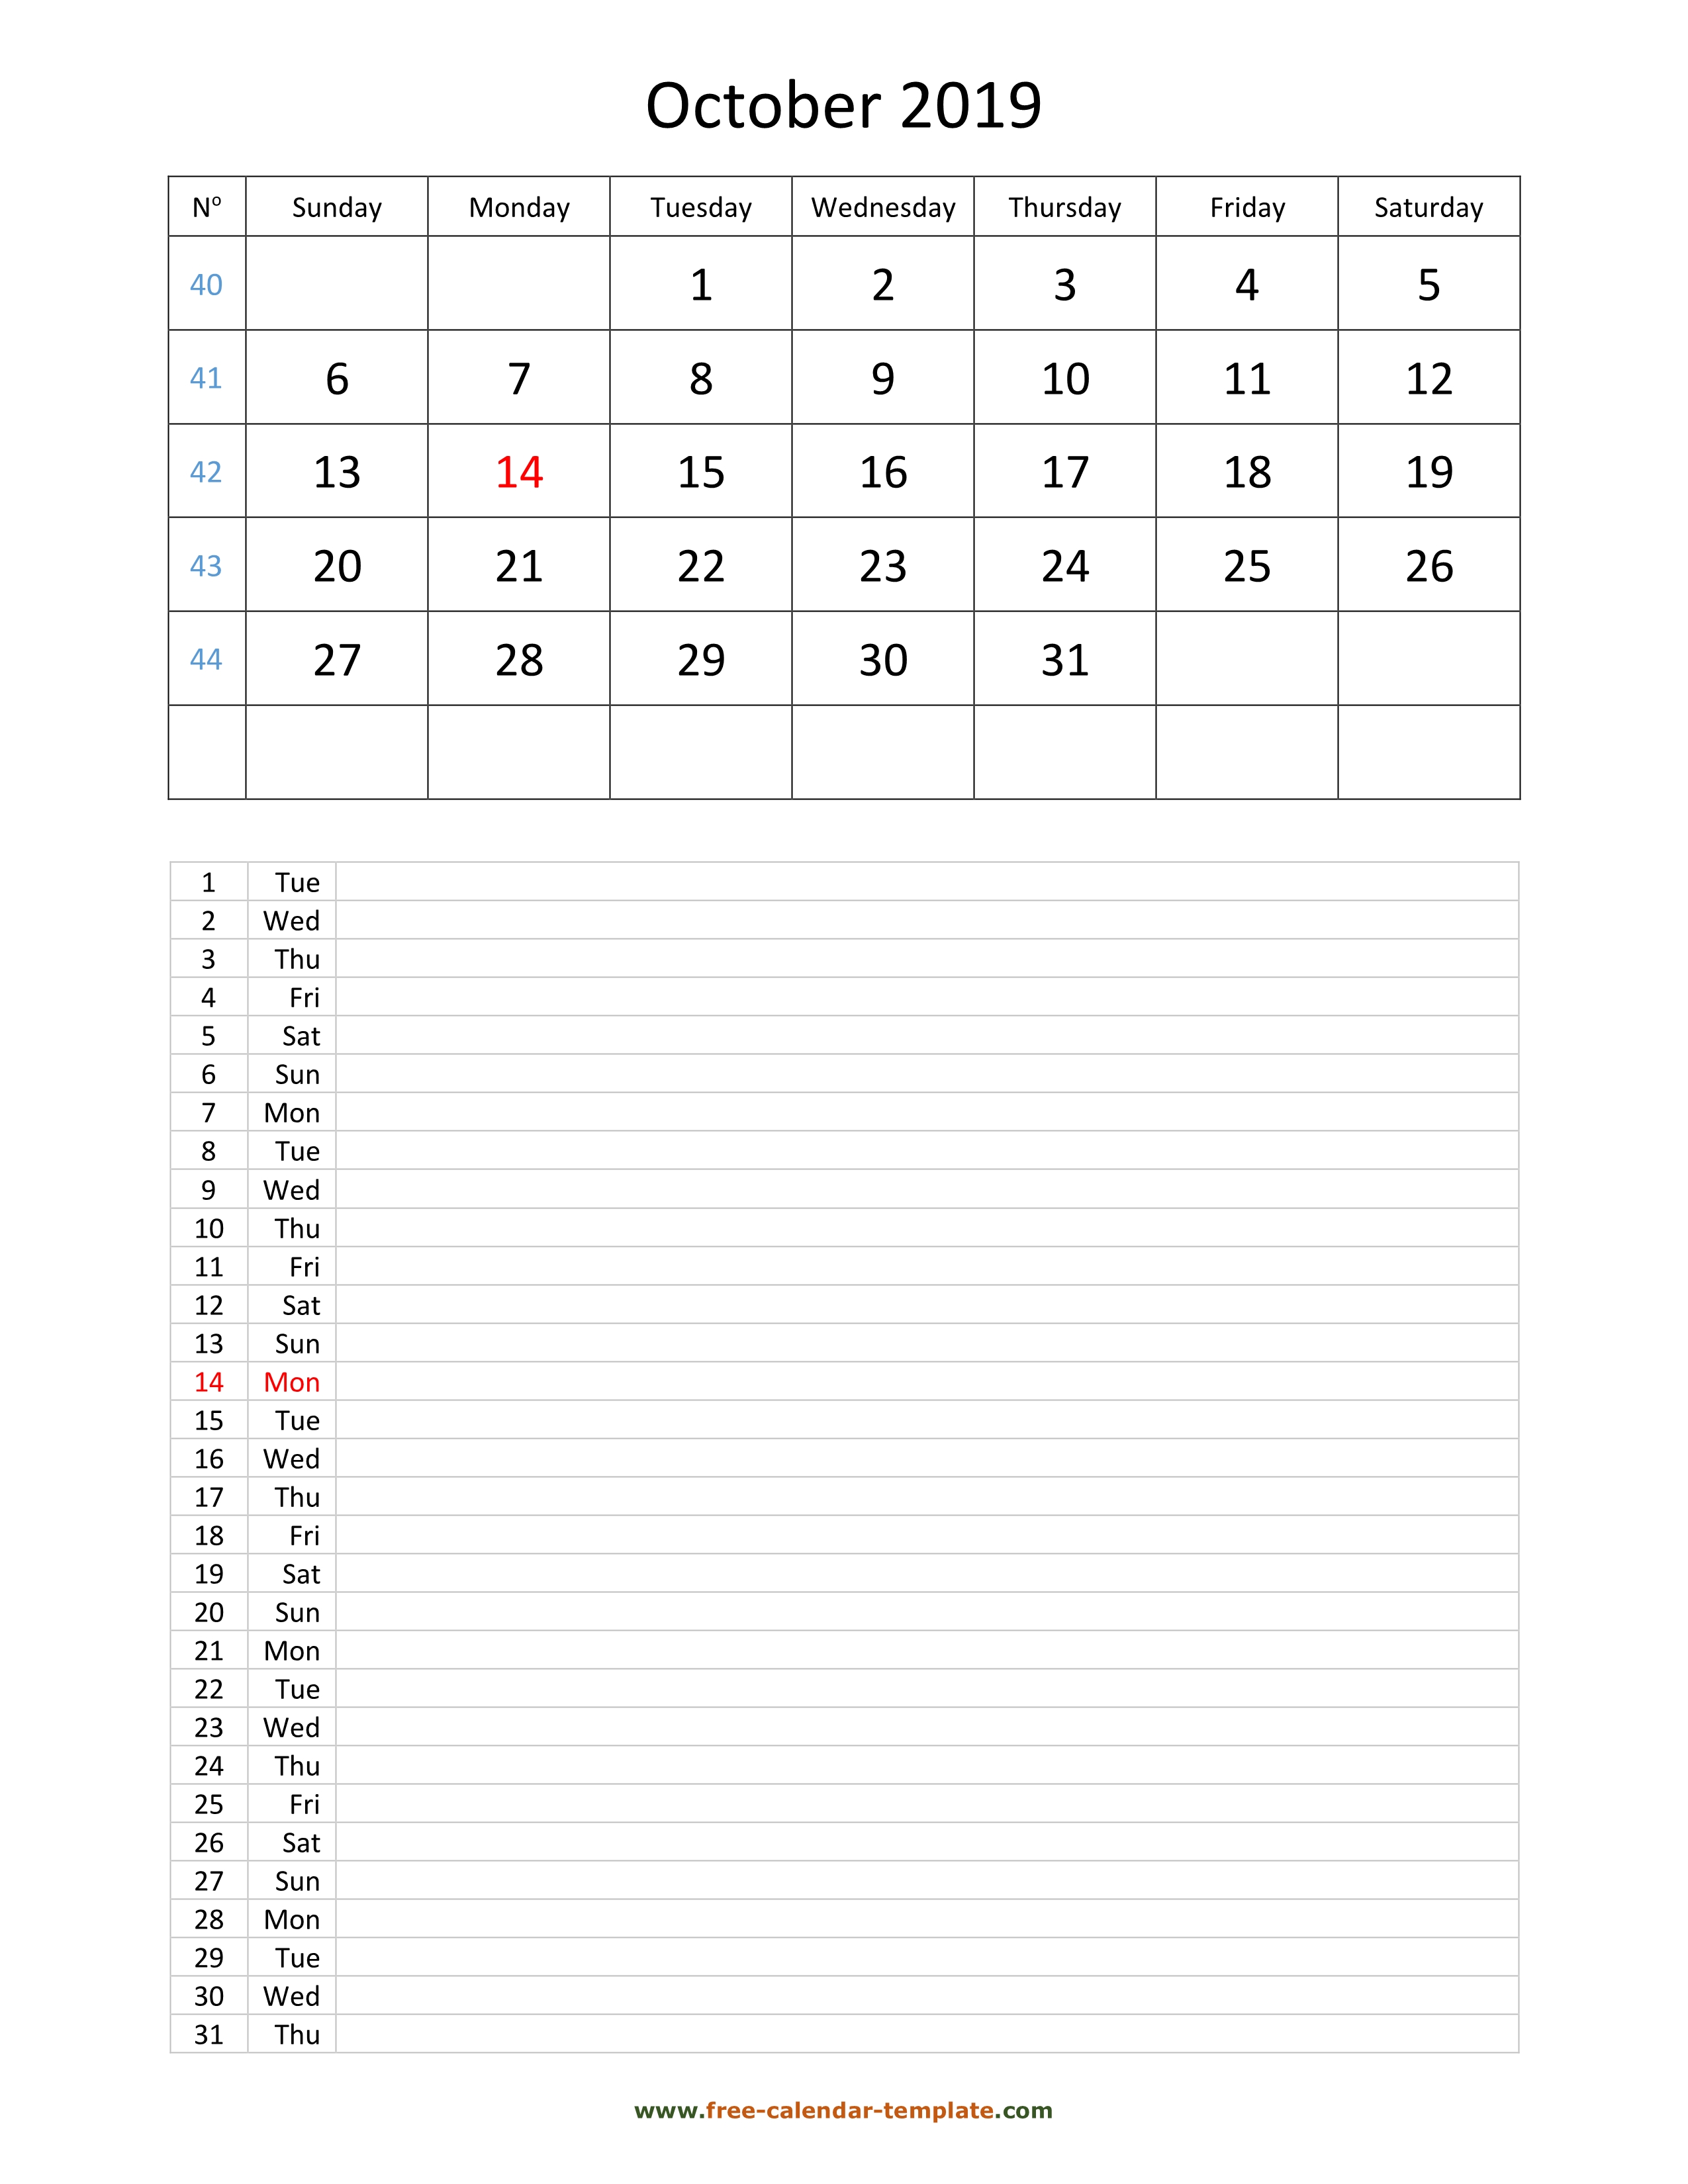 Daily Notes Template from www.free-calendar-template.com